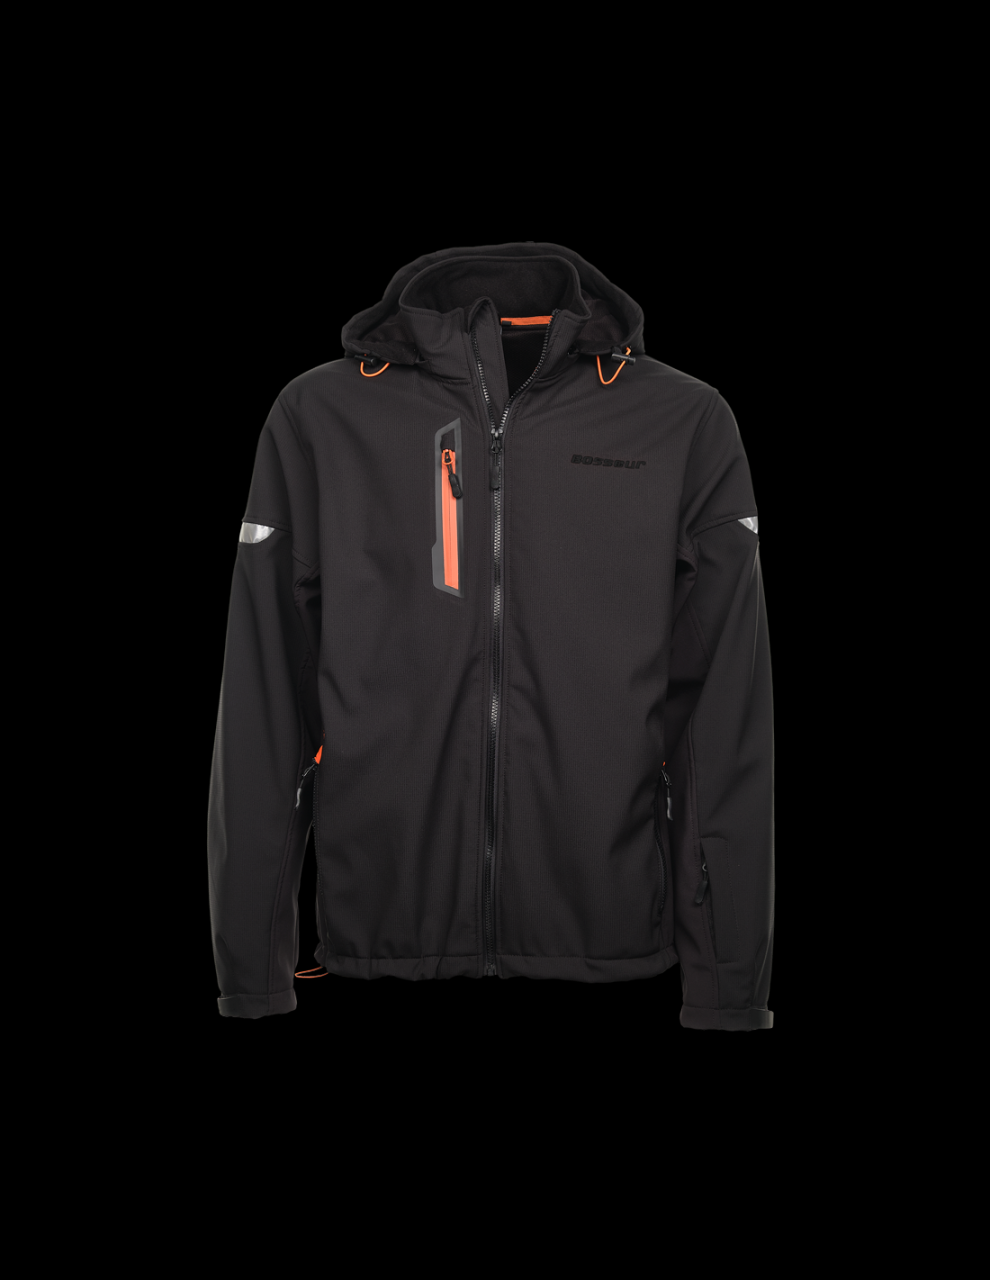 veste-softshell-doublee-trident-t-l-11500-003-tsd-confect-0